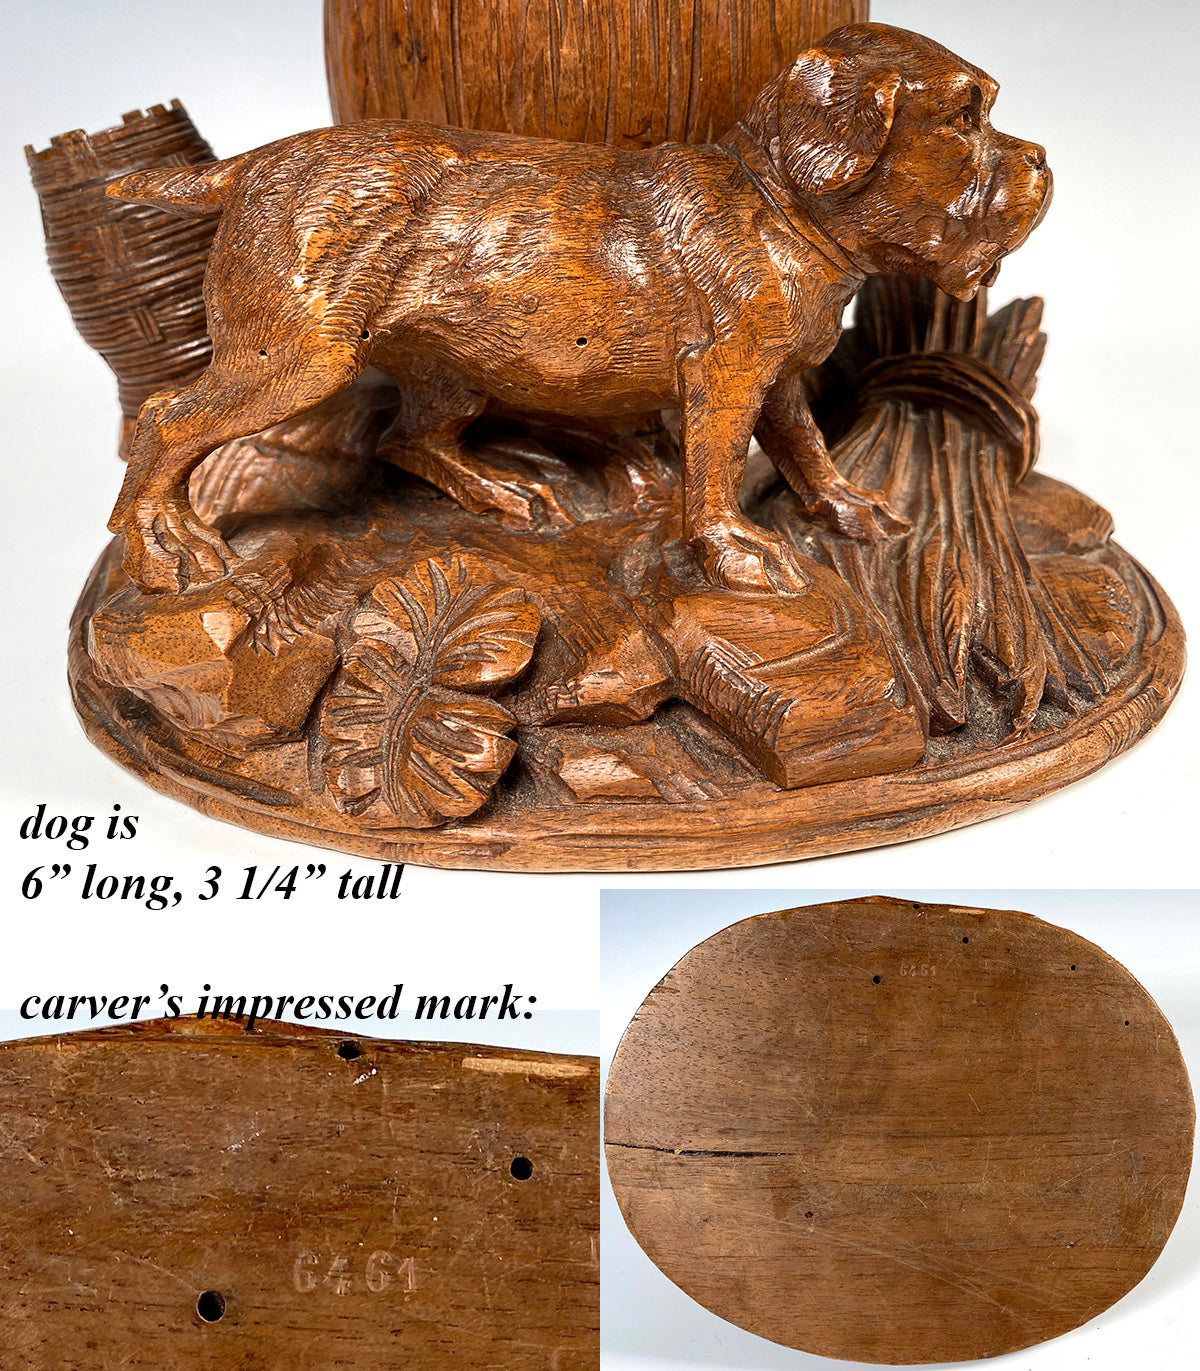 Fabulous Antique Swiss Hand Carved Black Forest Smoker's Stand, Cigar Caddy with Bull Dog